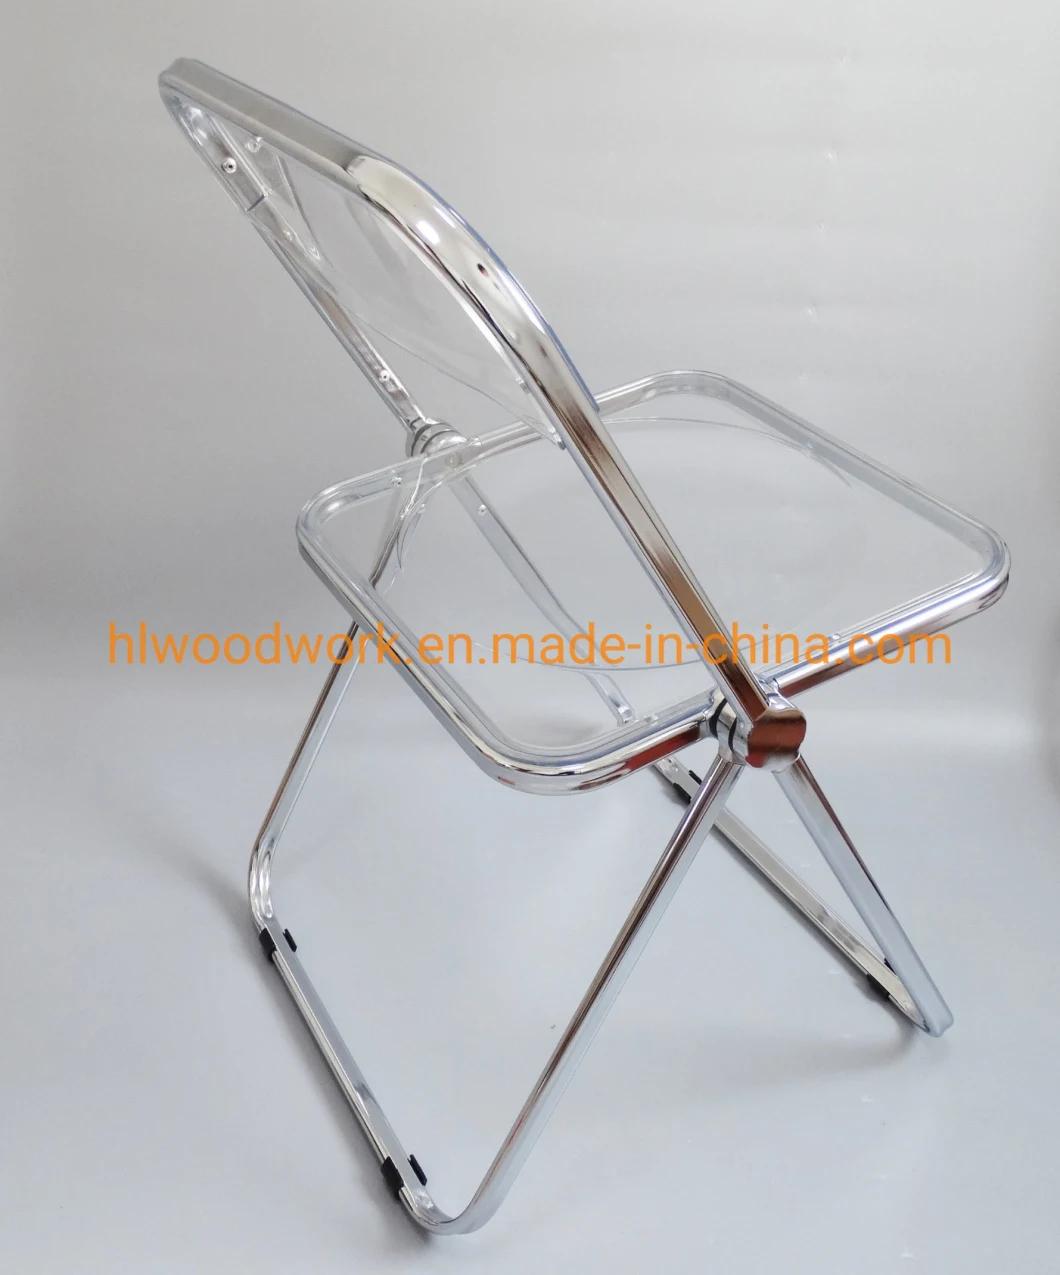 Modern Transparent Red Folding Chair PC Plastic Hotel Chairt Chrome Frame Office Bar Dining Leisure Banquet Wedding Meeting Chair Plastic Dining Chair